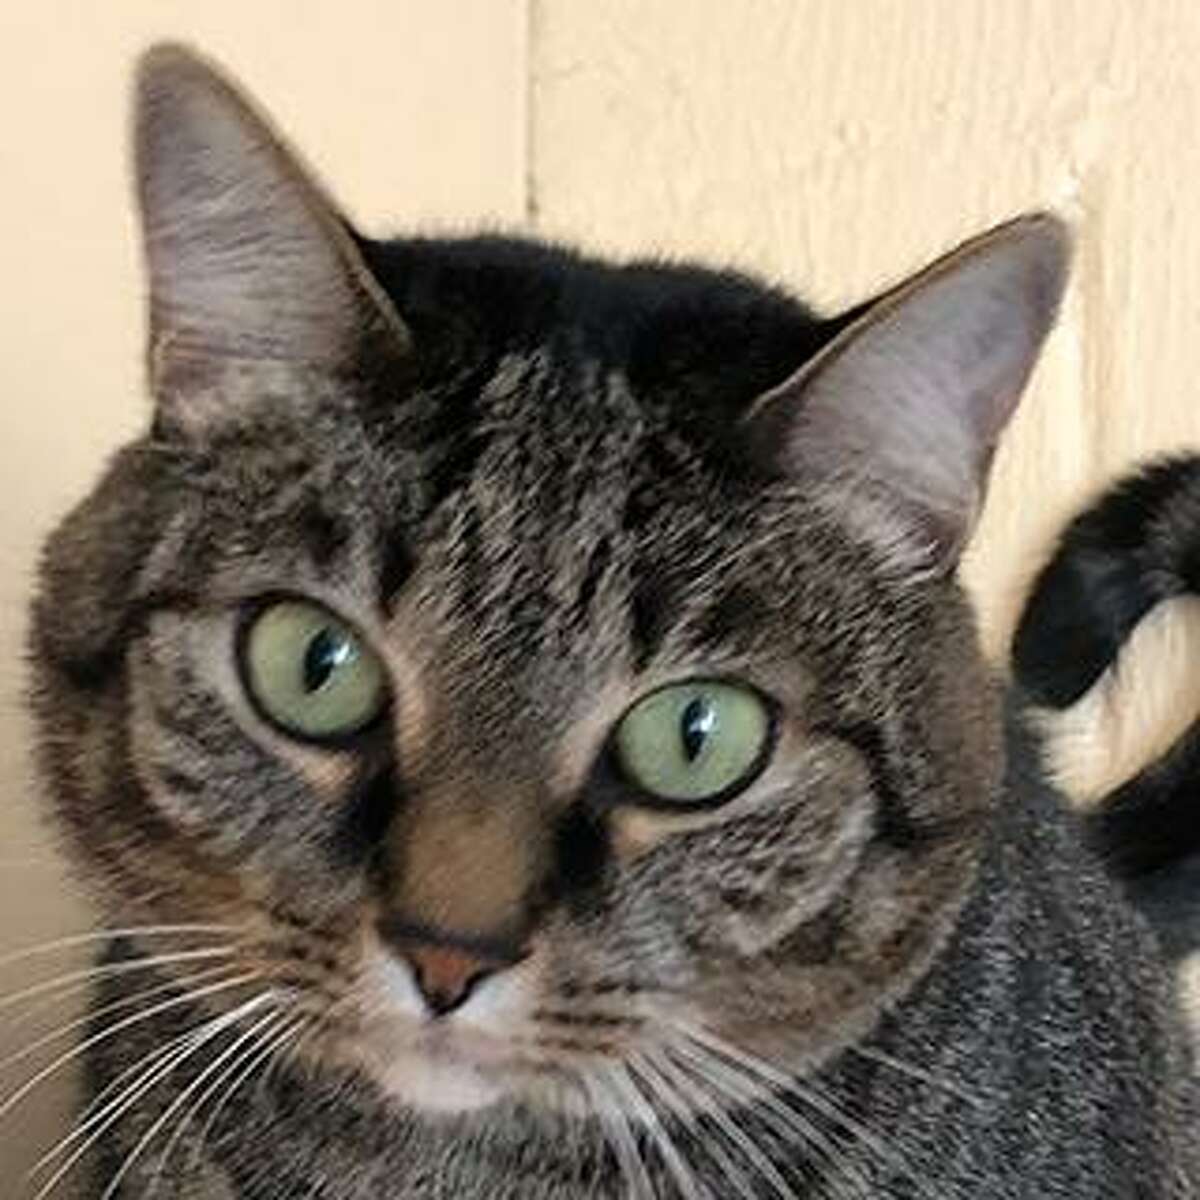 Meet Kriesty, a beautiful 6 year old tabby. If you’re a sucker for green eyes, this girl is for you. She’s an independent cat with low energy and beautiful house manners who has been a loved indoor cat with a single owner her whole life. She would prefer to be the sole companion to a person or a couple, unbothered by the comings and goings of kids and other pets. She is opinionated on what kind of attention she receives — she’ll accept face and chin scratches forever, but prefers not to have her lower back ruffled. Because she is a bit particular, she is best suited to a family with previous cat experience who will know how to read her signals. She’s available in Westport. Remember, the Connecticut Humane Society has no time limits for adoption. Applications for adoption can be obtained at https://cthumane.org/adopt/all-adoptable-pets/. To learn more about operations during COVID-19, go to https://cthumane.org/adopt/adoption-process/.